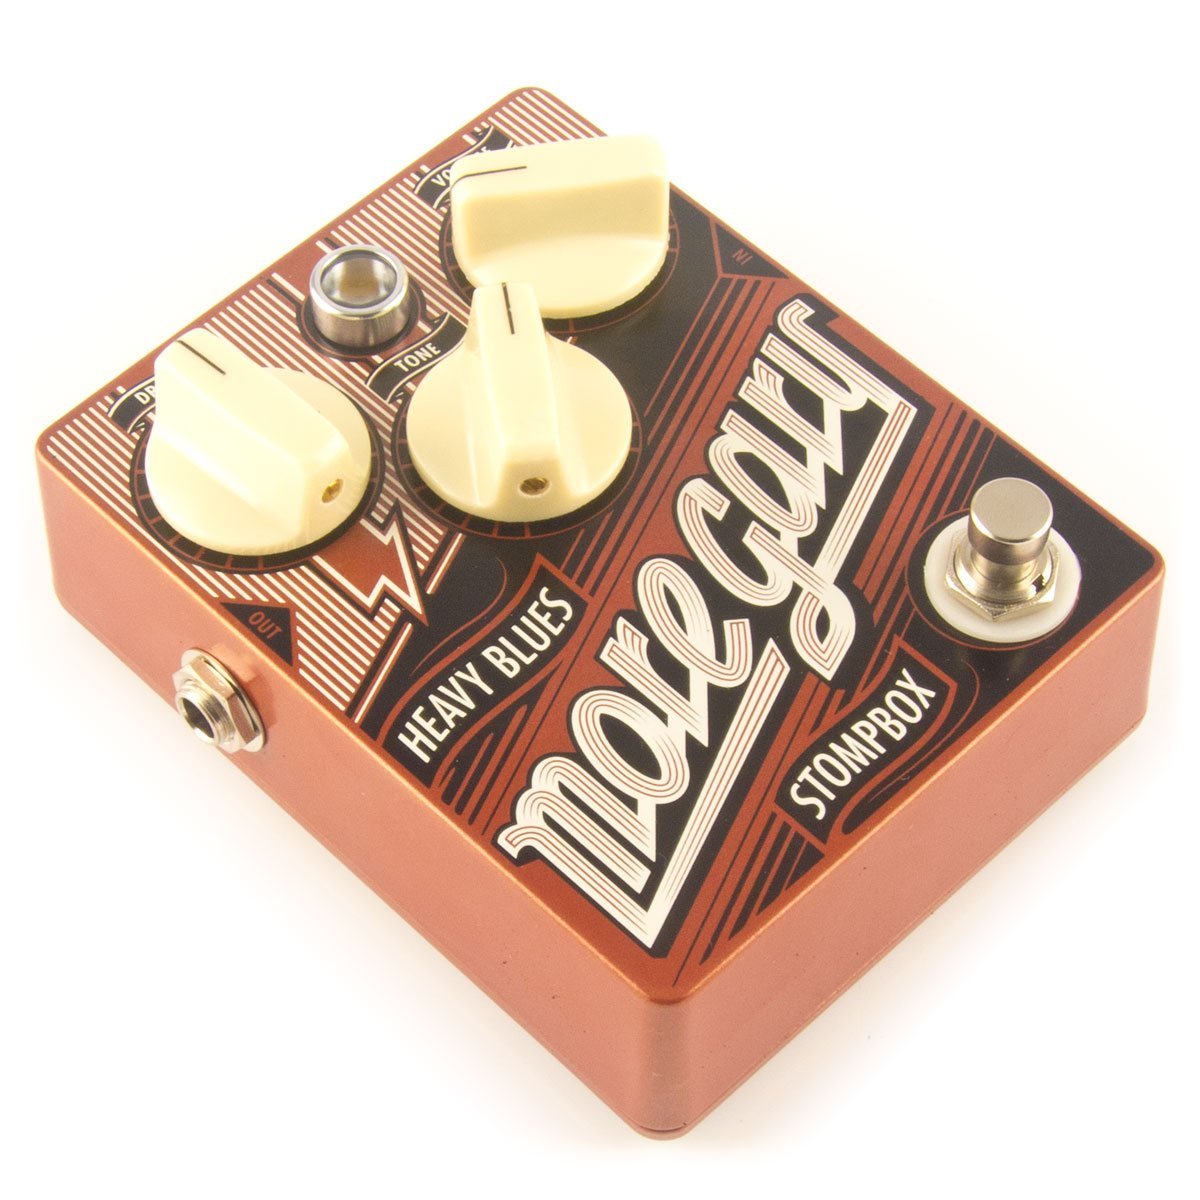 Dr.no Effects More Gary Heavy Blues Overdrive - Overdrive, distortion & fuzz effect pedal - Variation 1